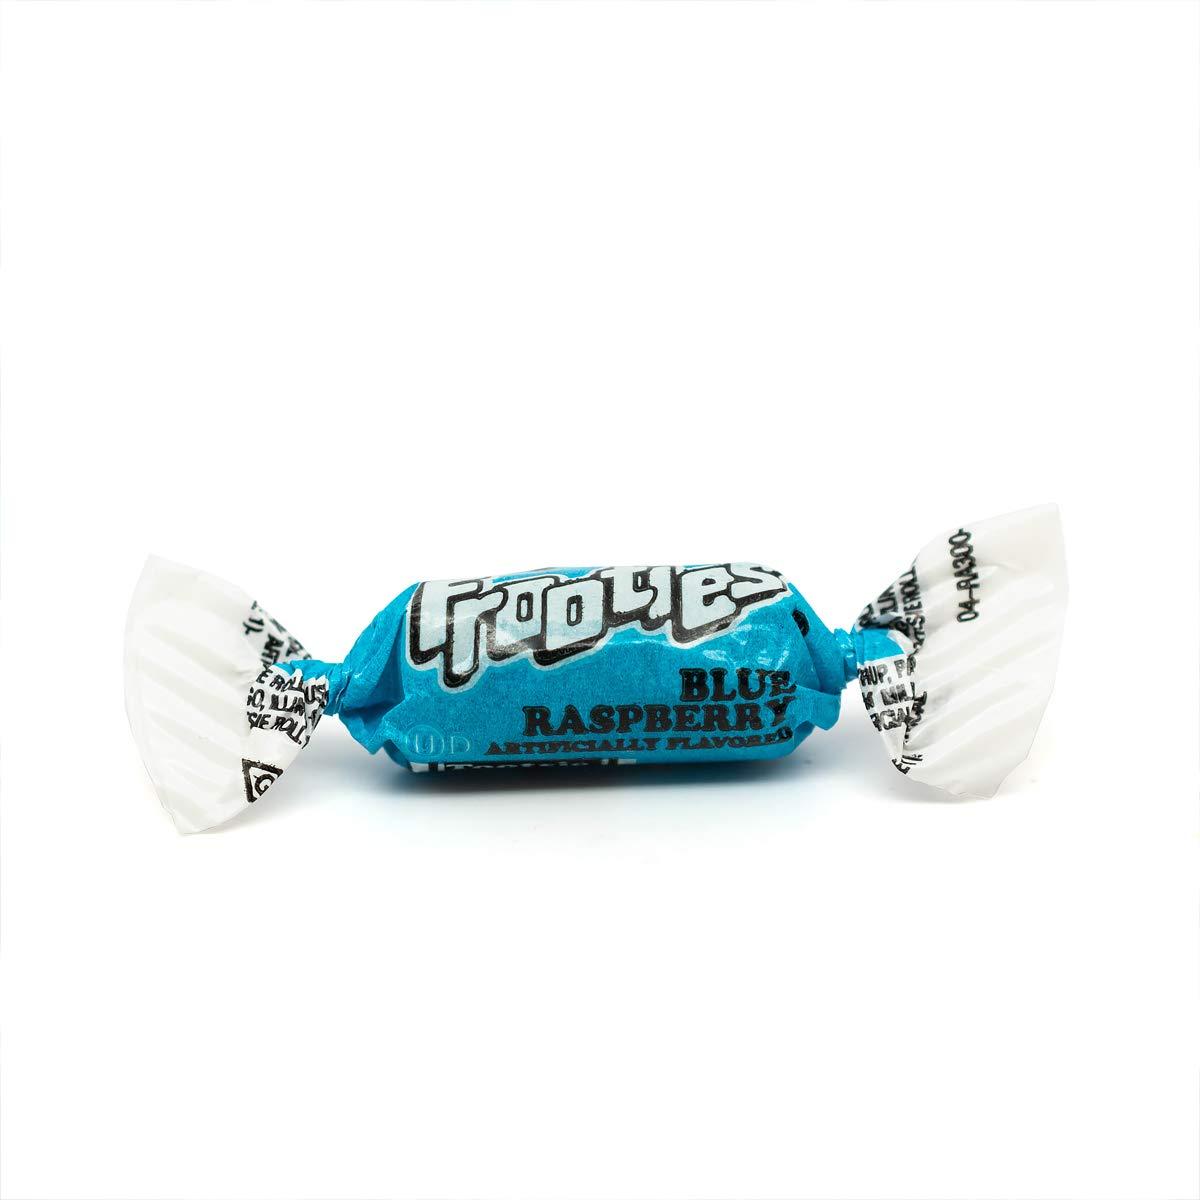 Blue Raspberry Booster - Only Kosher Candy